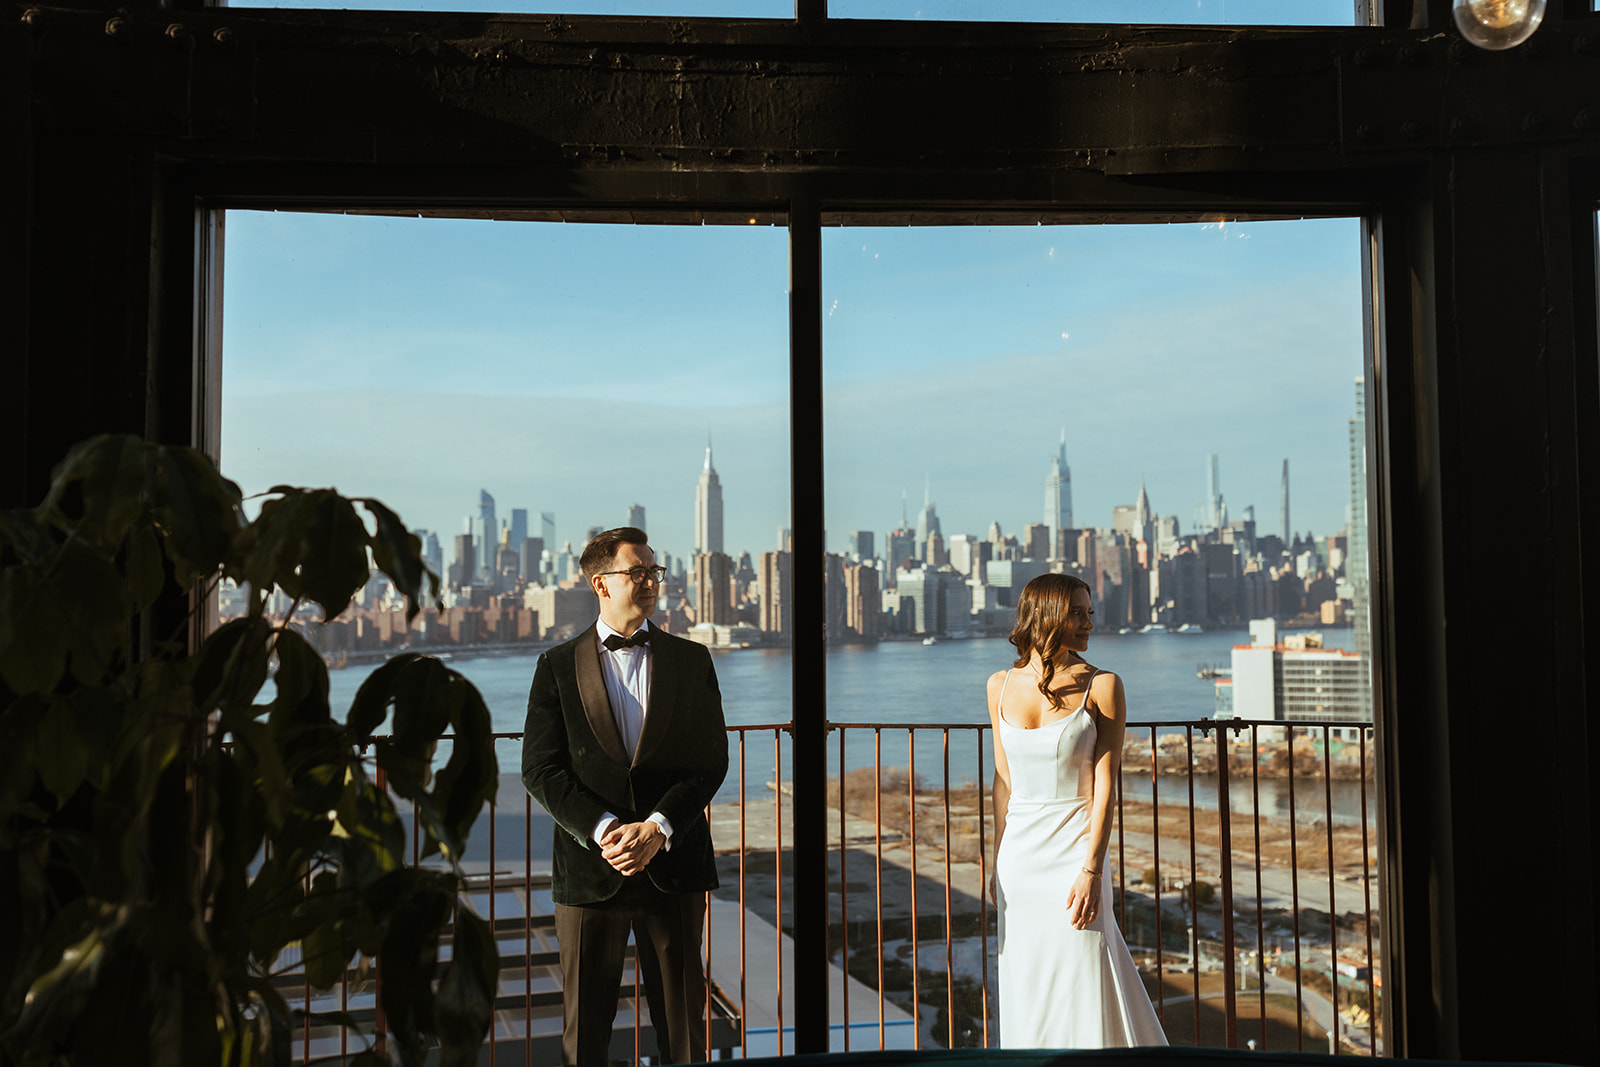 A modern and romantic candle-lit wedding with rustic-chic touches at Brooklyn Winery. Shot by Weddings by Nato